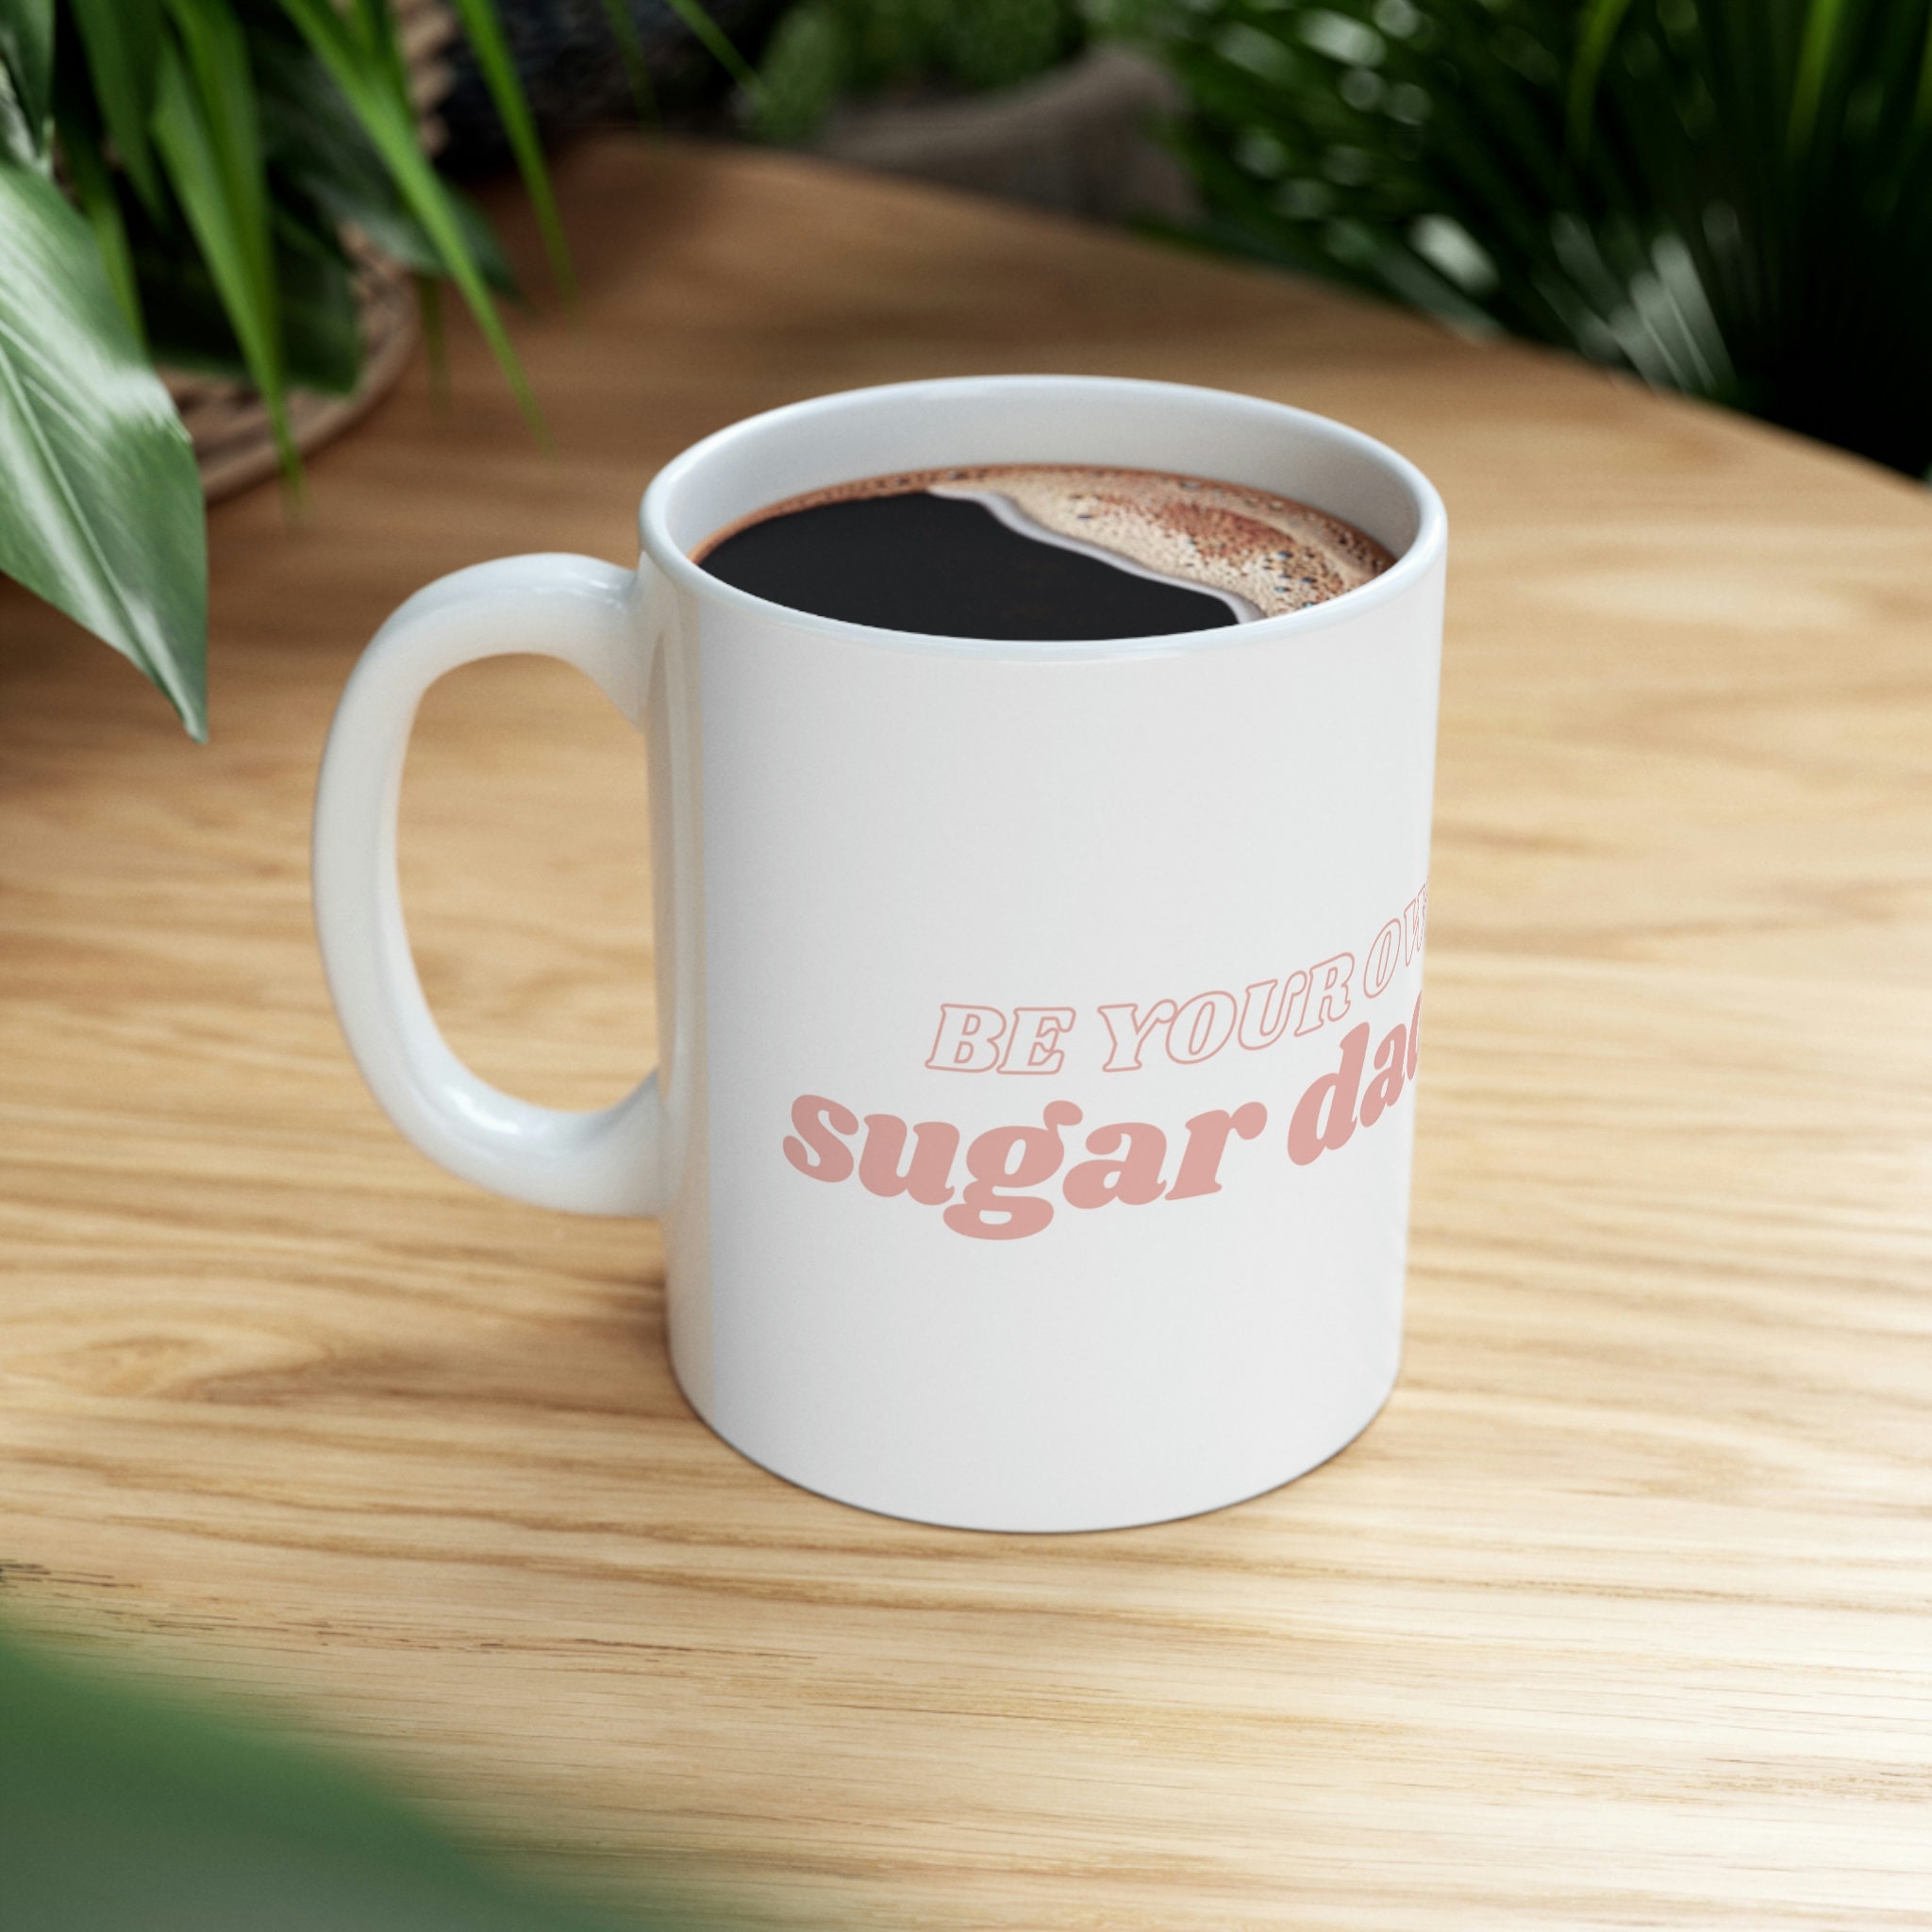 Small business owner mug - Pink Coffee — Small business owner mug - Pink  Coffee